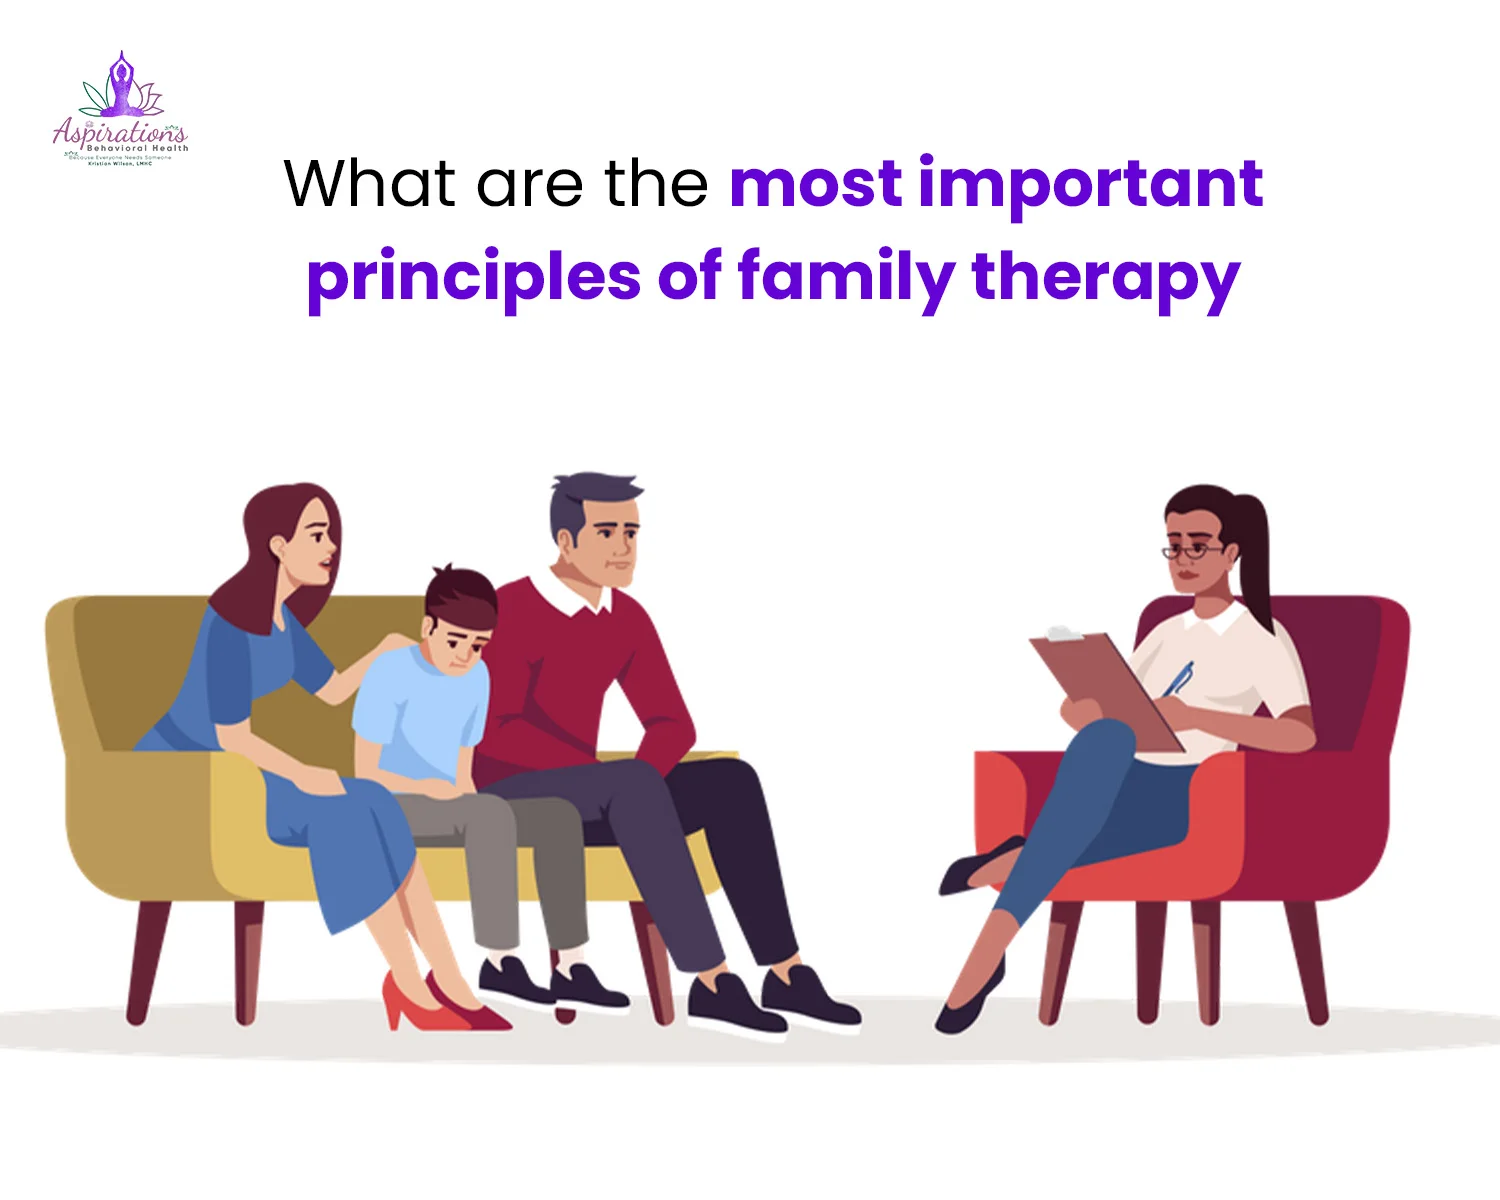 What are the most important principles of family therapy?